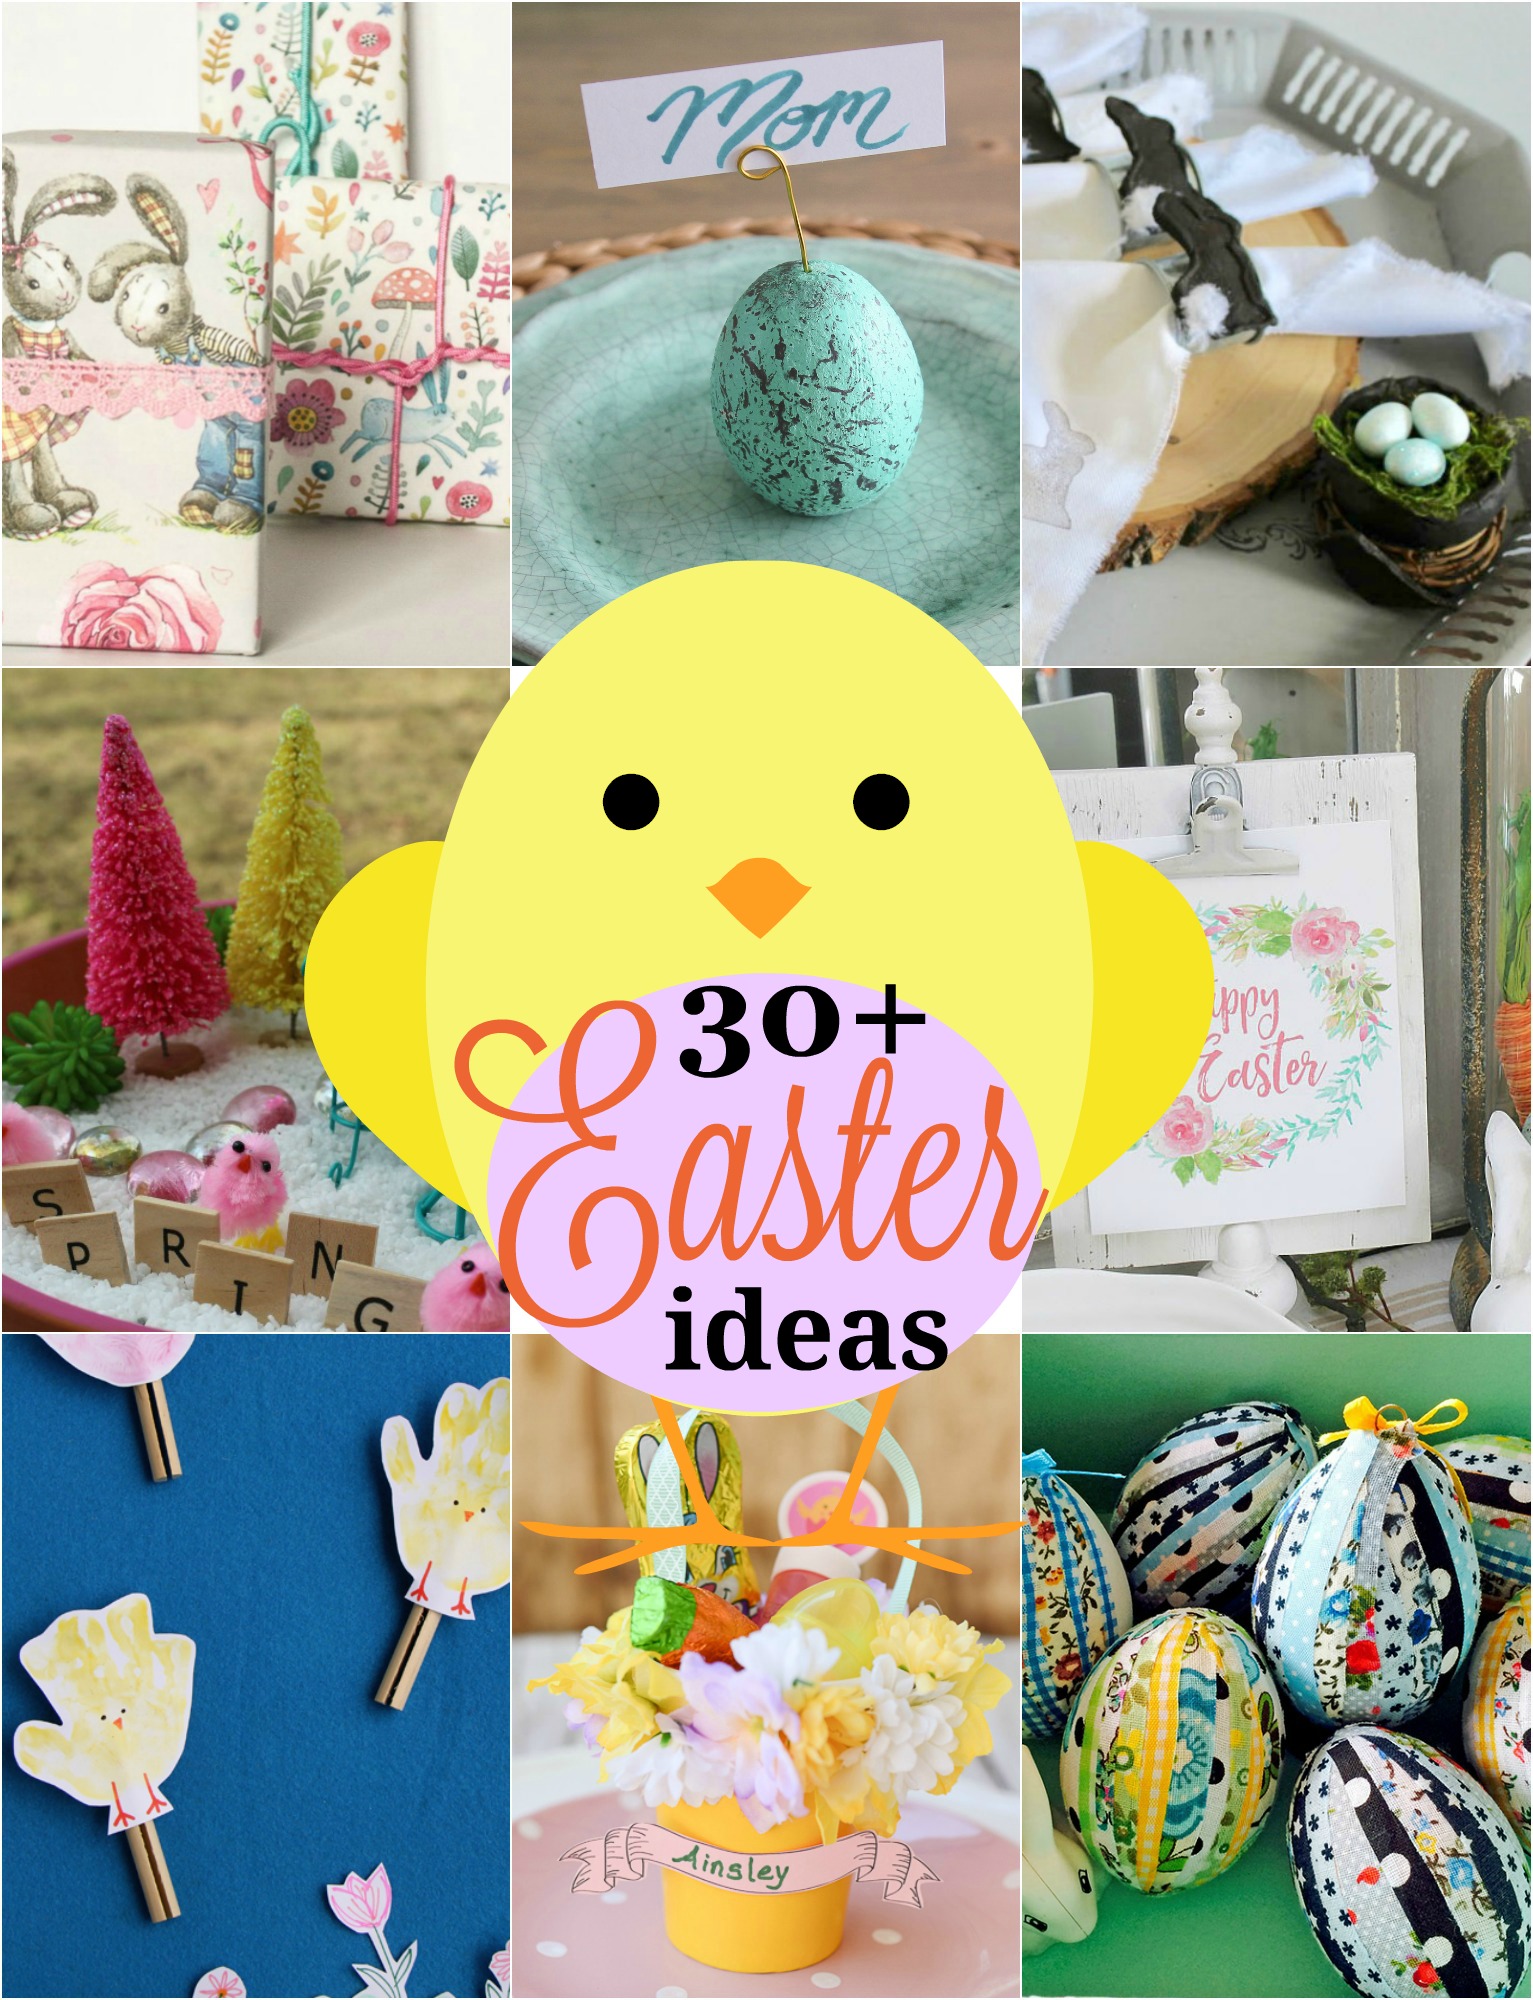 30+ Easter Craft and Decor Ideas | Yesterday On Tuesday